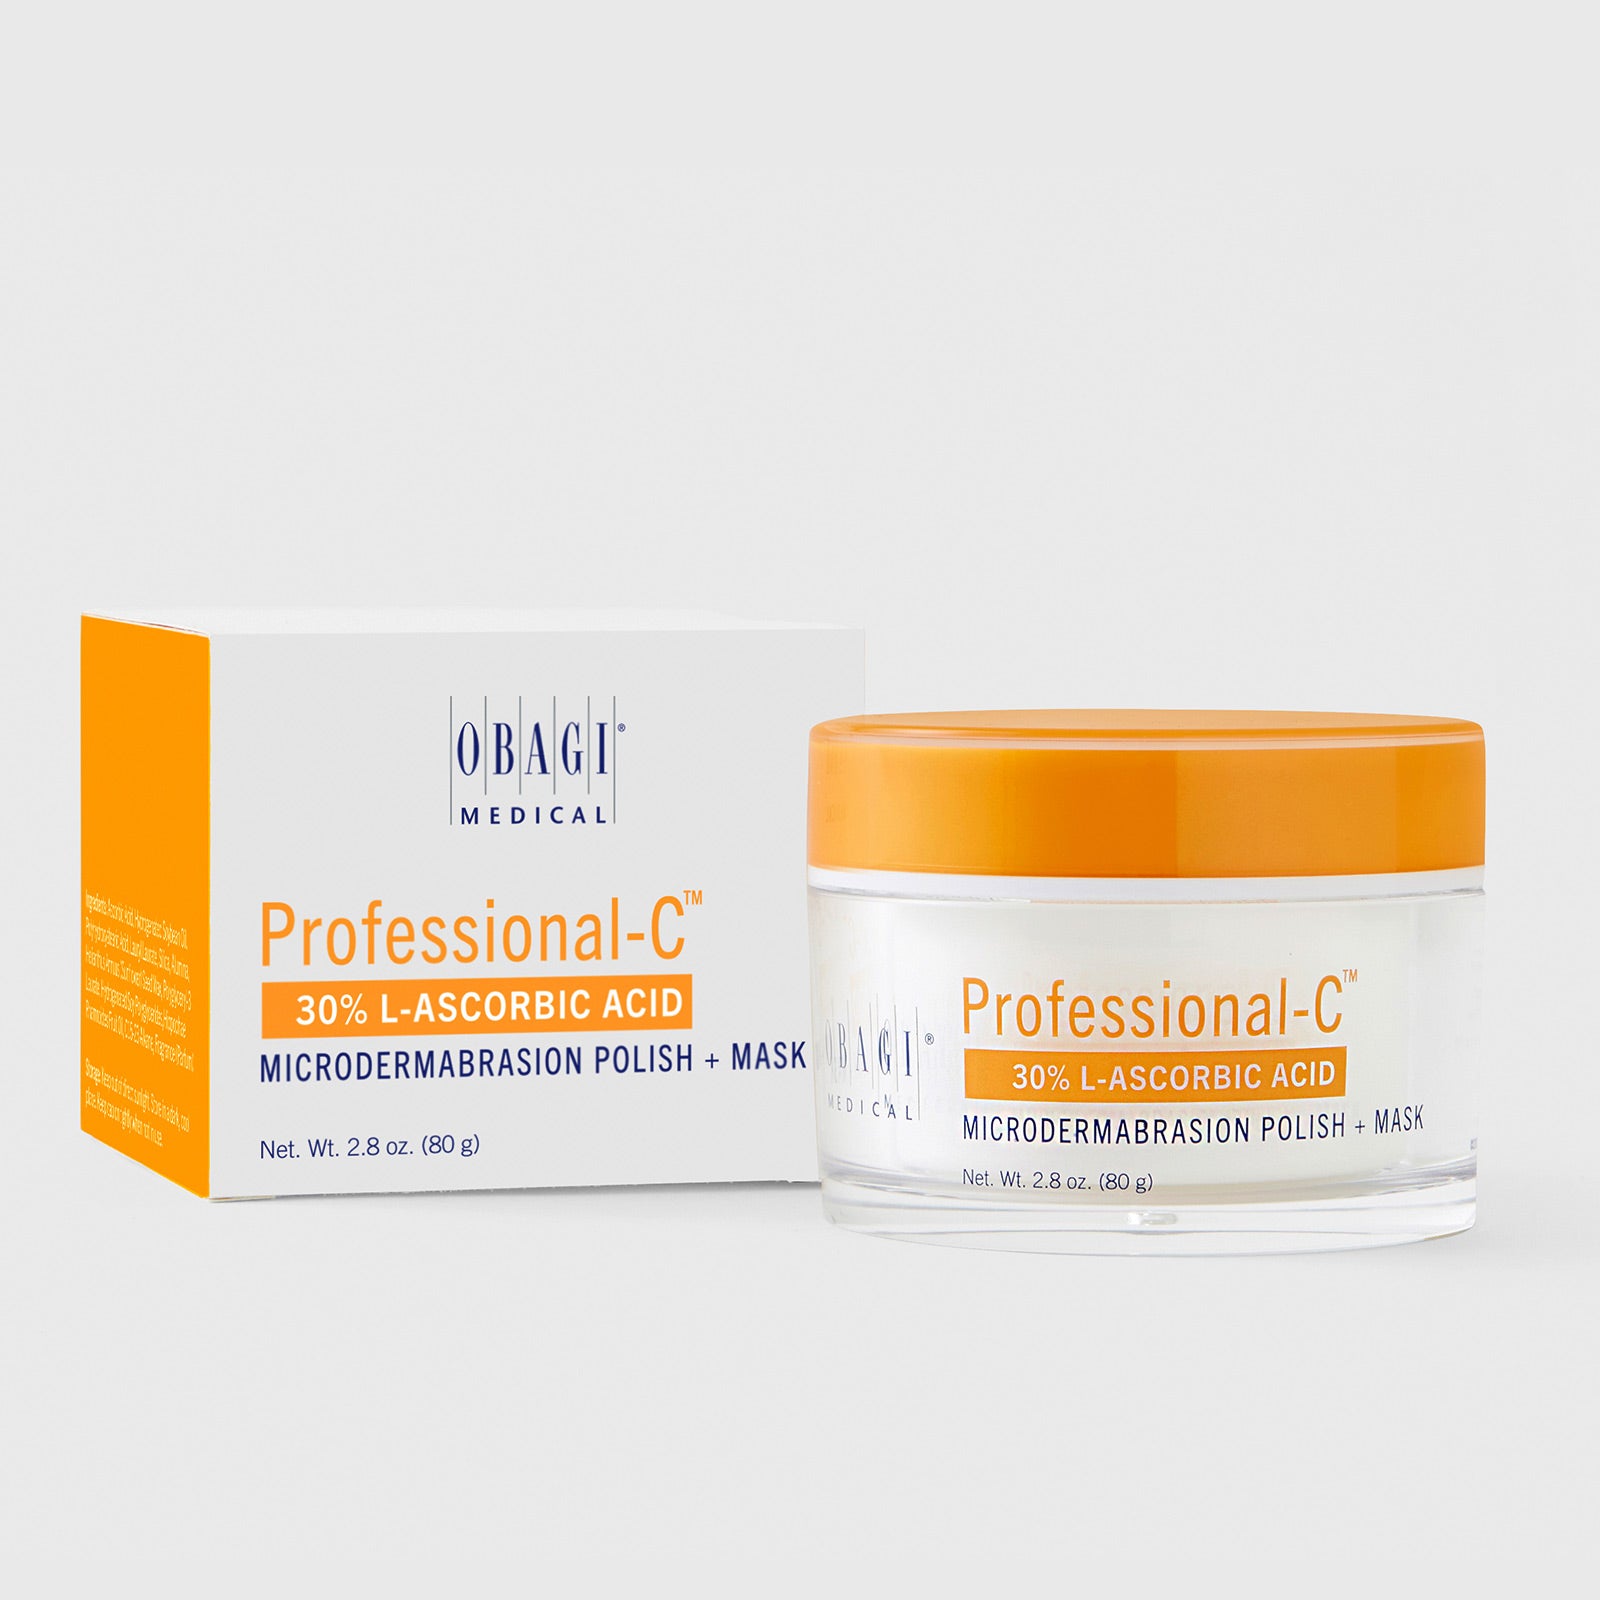 Obagi Medical Professional C Microdermabrasion Mask + Polish from MyExceptionalSkinCare.com Jar with Carton